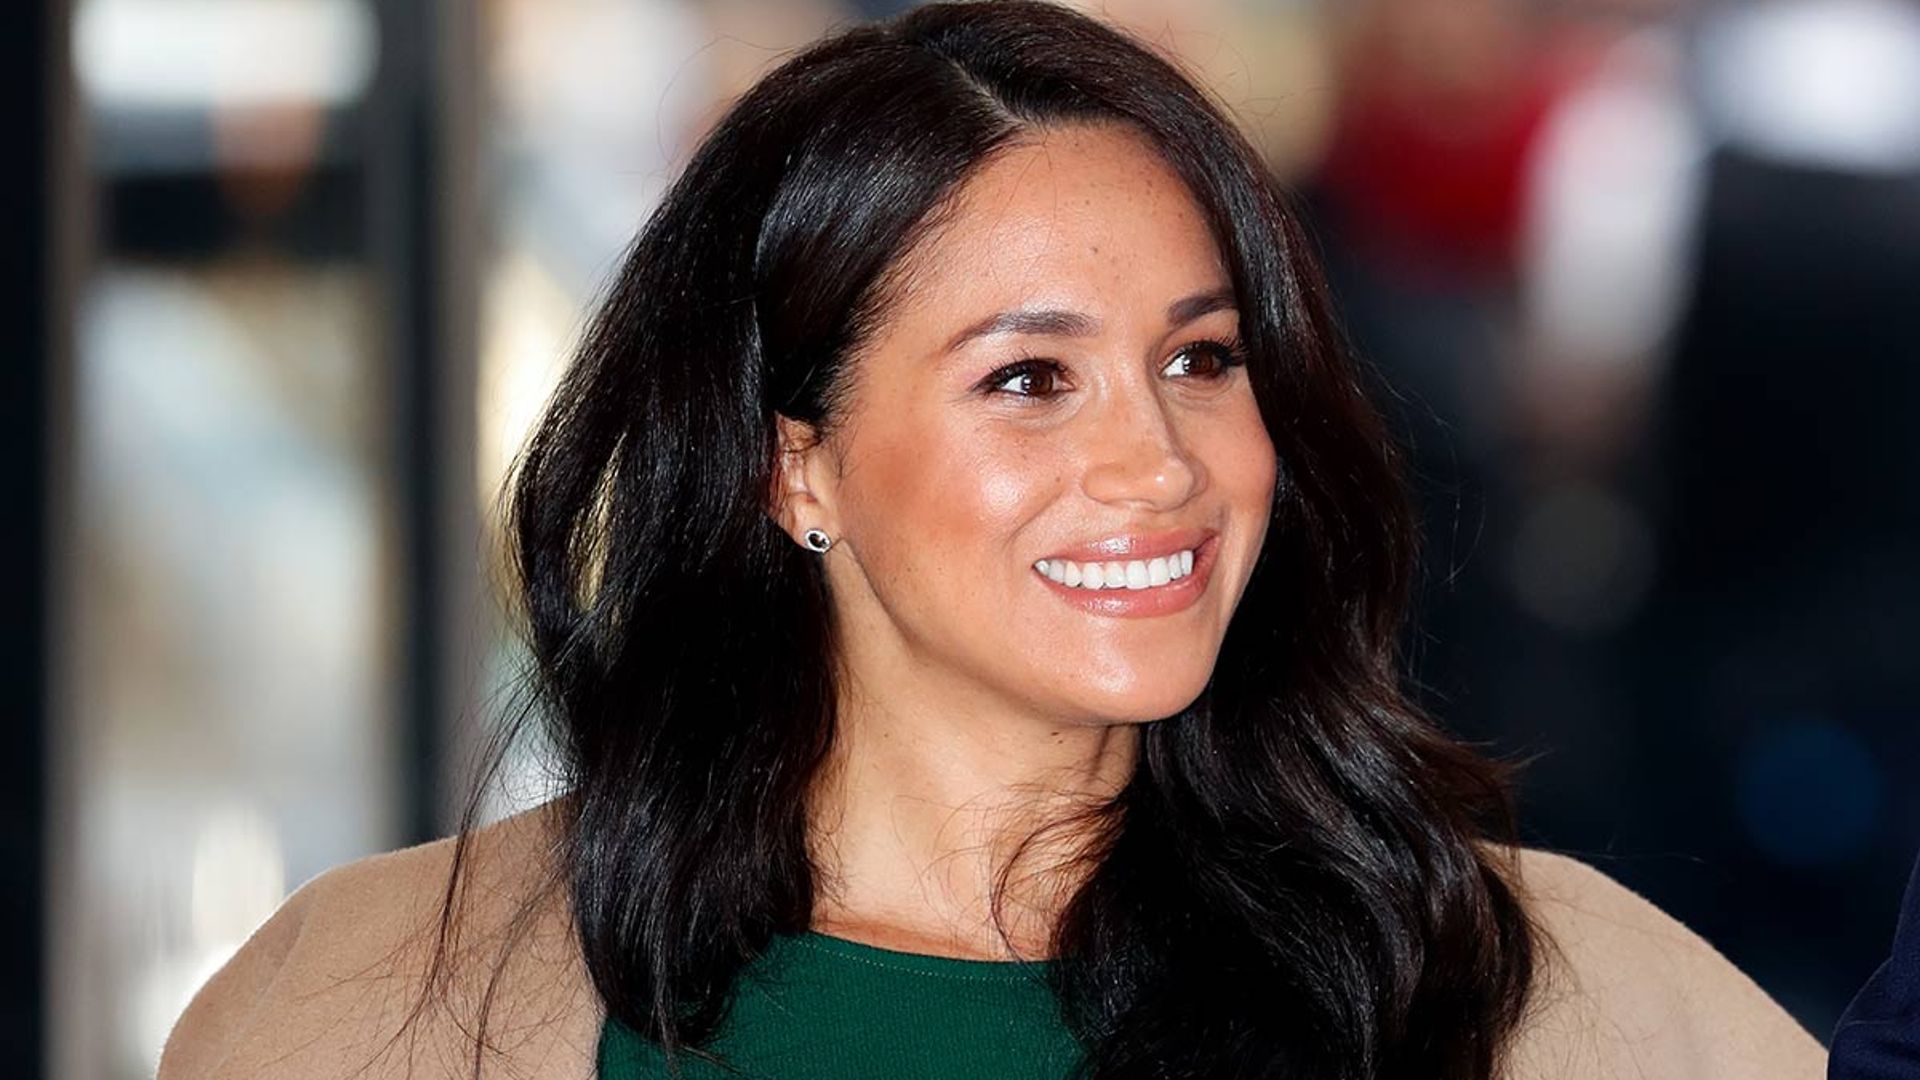 Meghan Markle’s Max Mara camel coat from her New York trip is top of